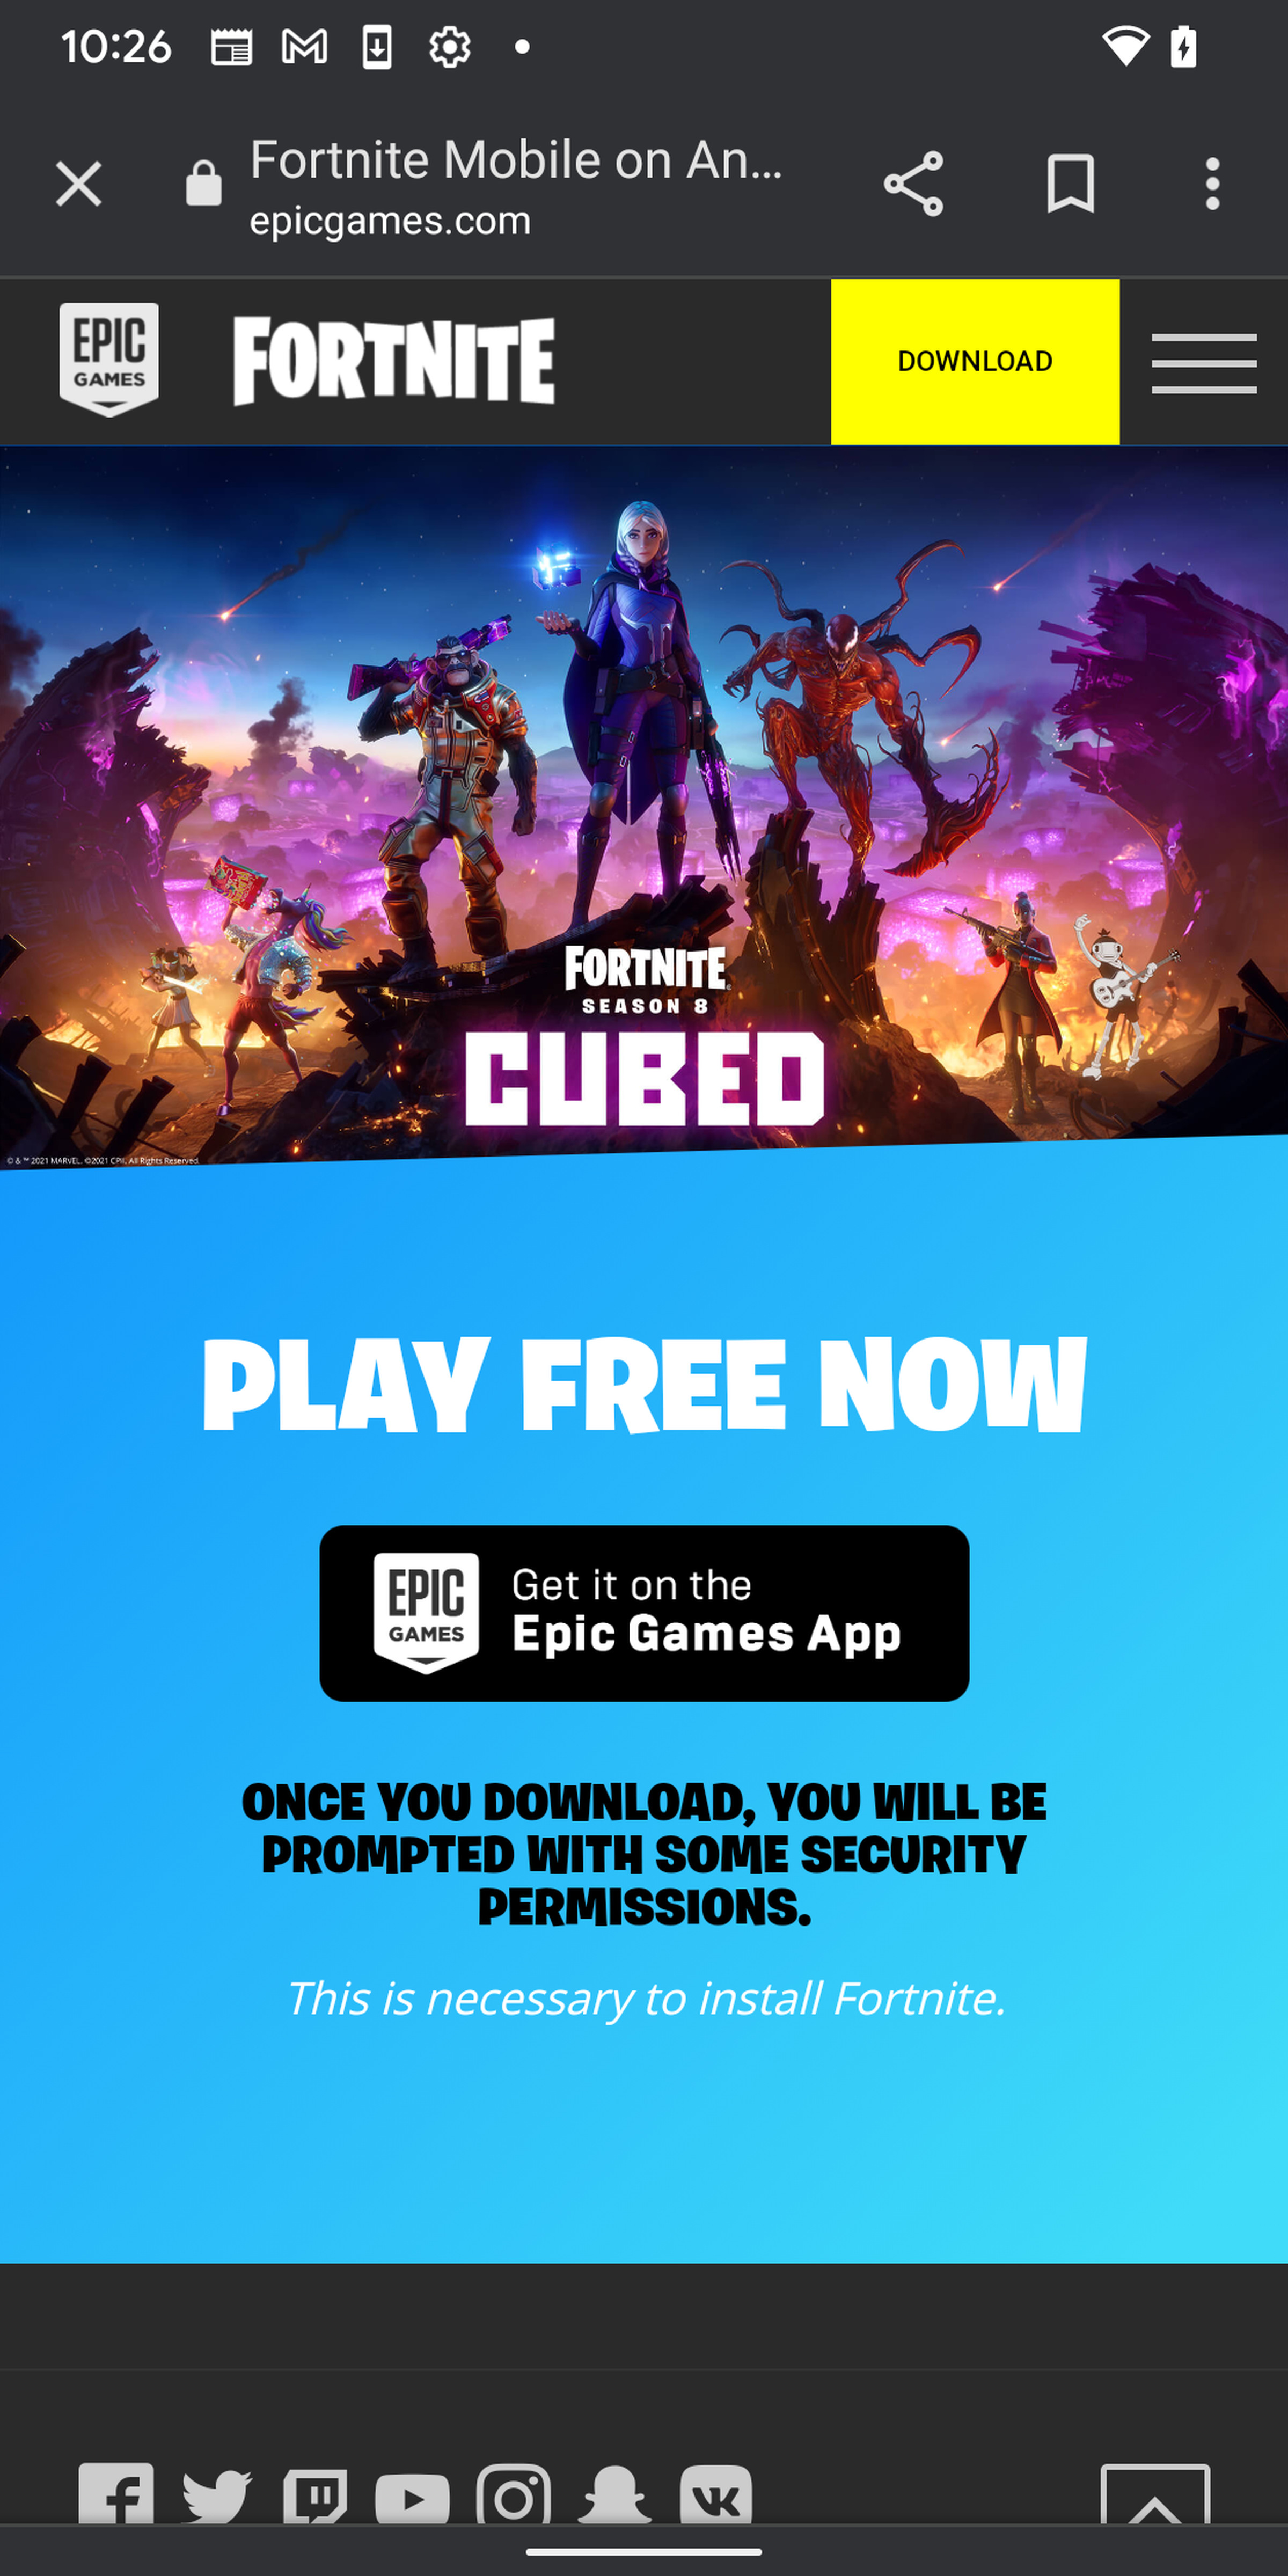 Go to the Epic Games site using your phone to download the installer.